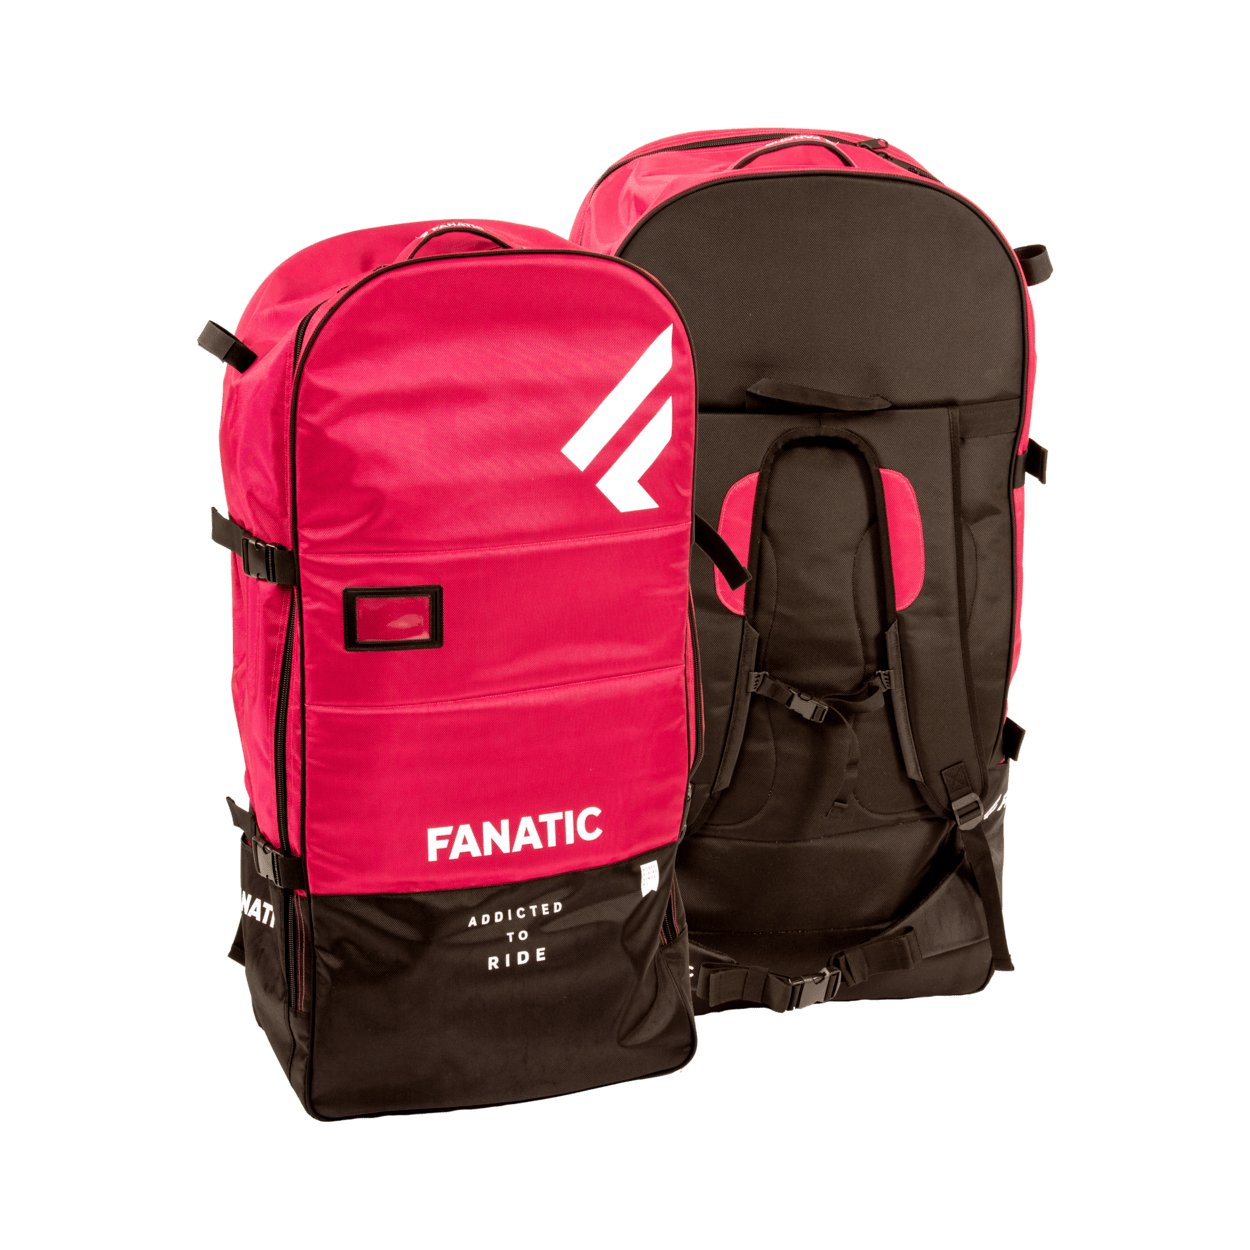 Fanatic Gearbag Pure iSUP 2024 - Worthing Watersports - 9008415928026 - Spareparts - Fanatic SUP